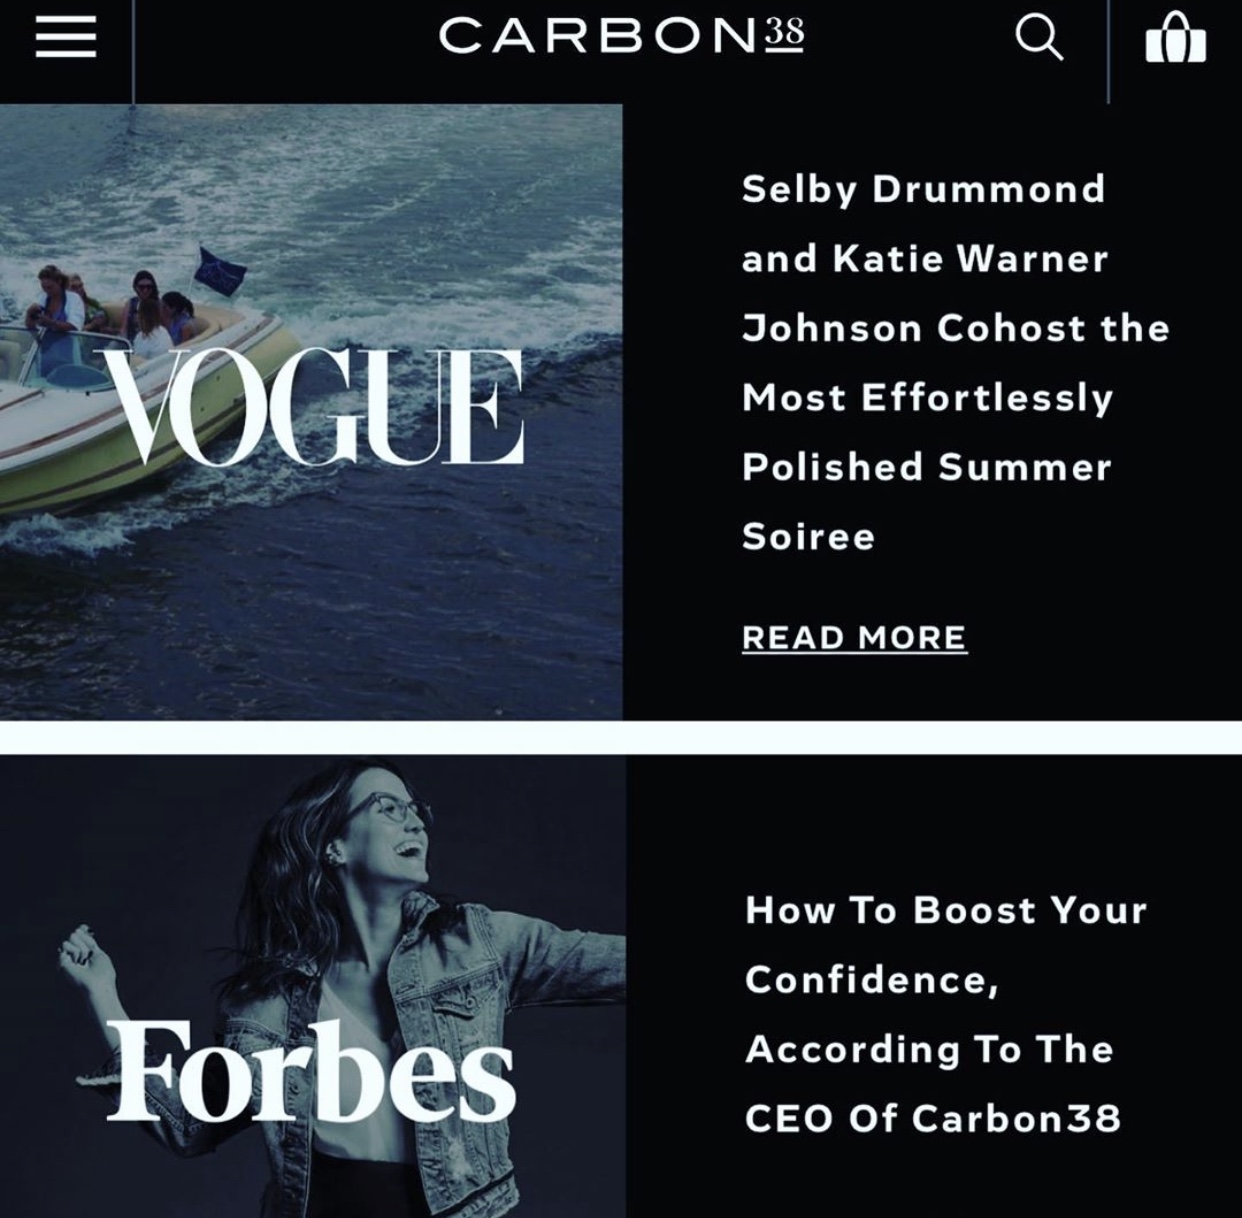 Carbon38 vogue Forbes shawn rene zimmerman promo code